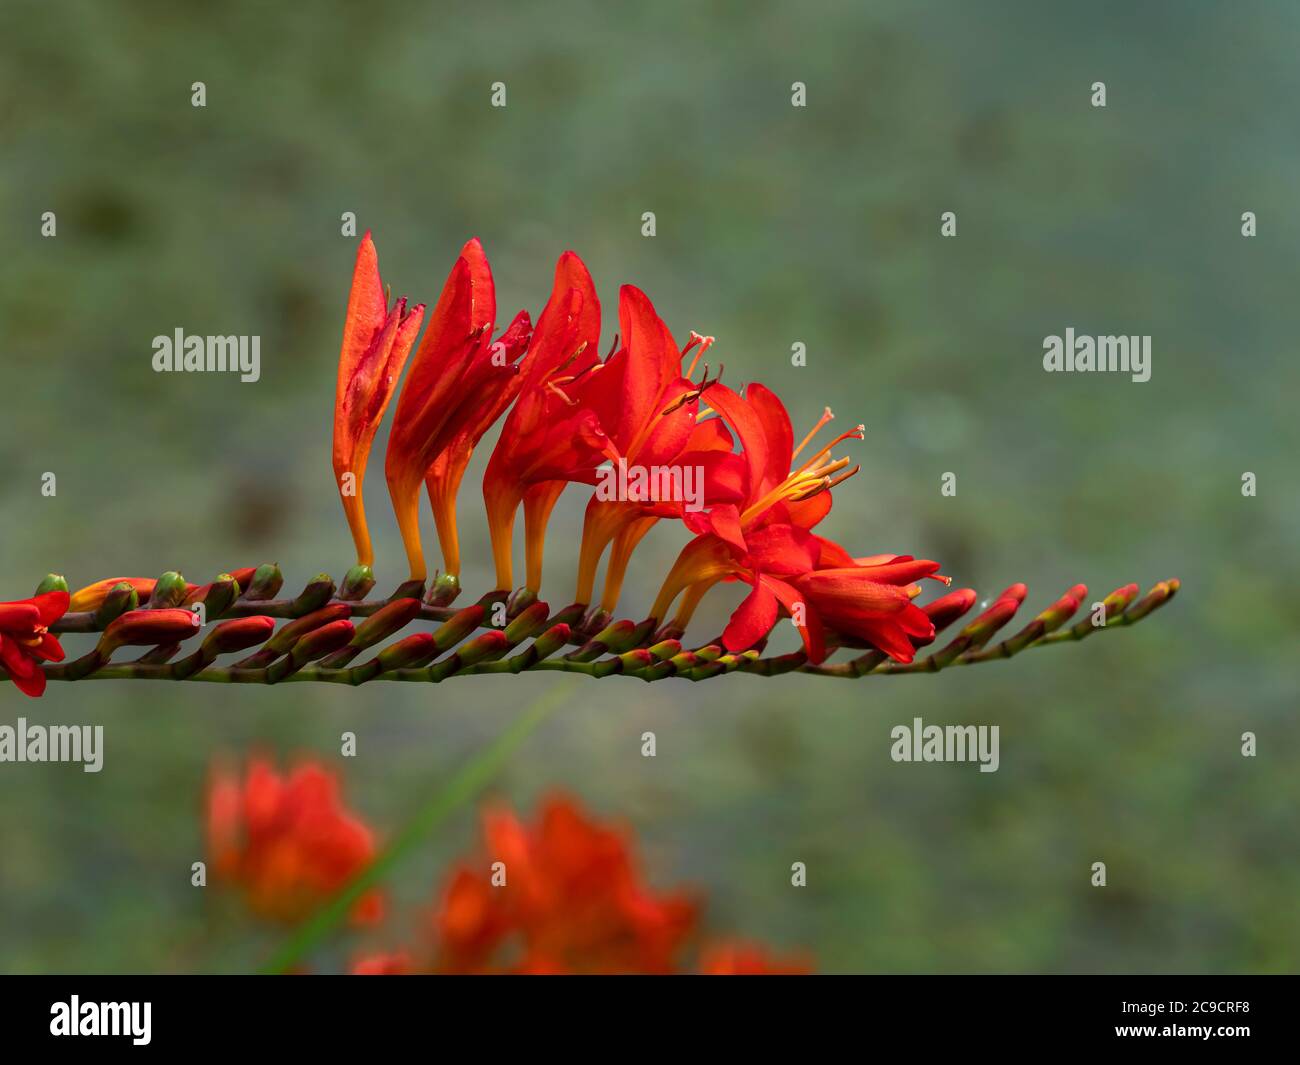 Closeup of the flower spike of Crocosmia with red flowers and buds Stock Photo